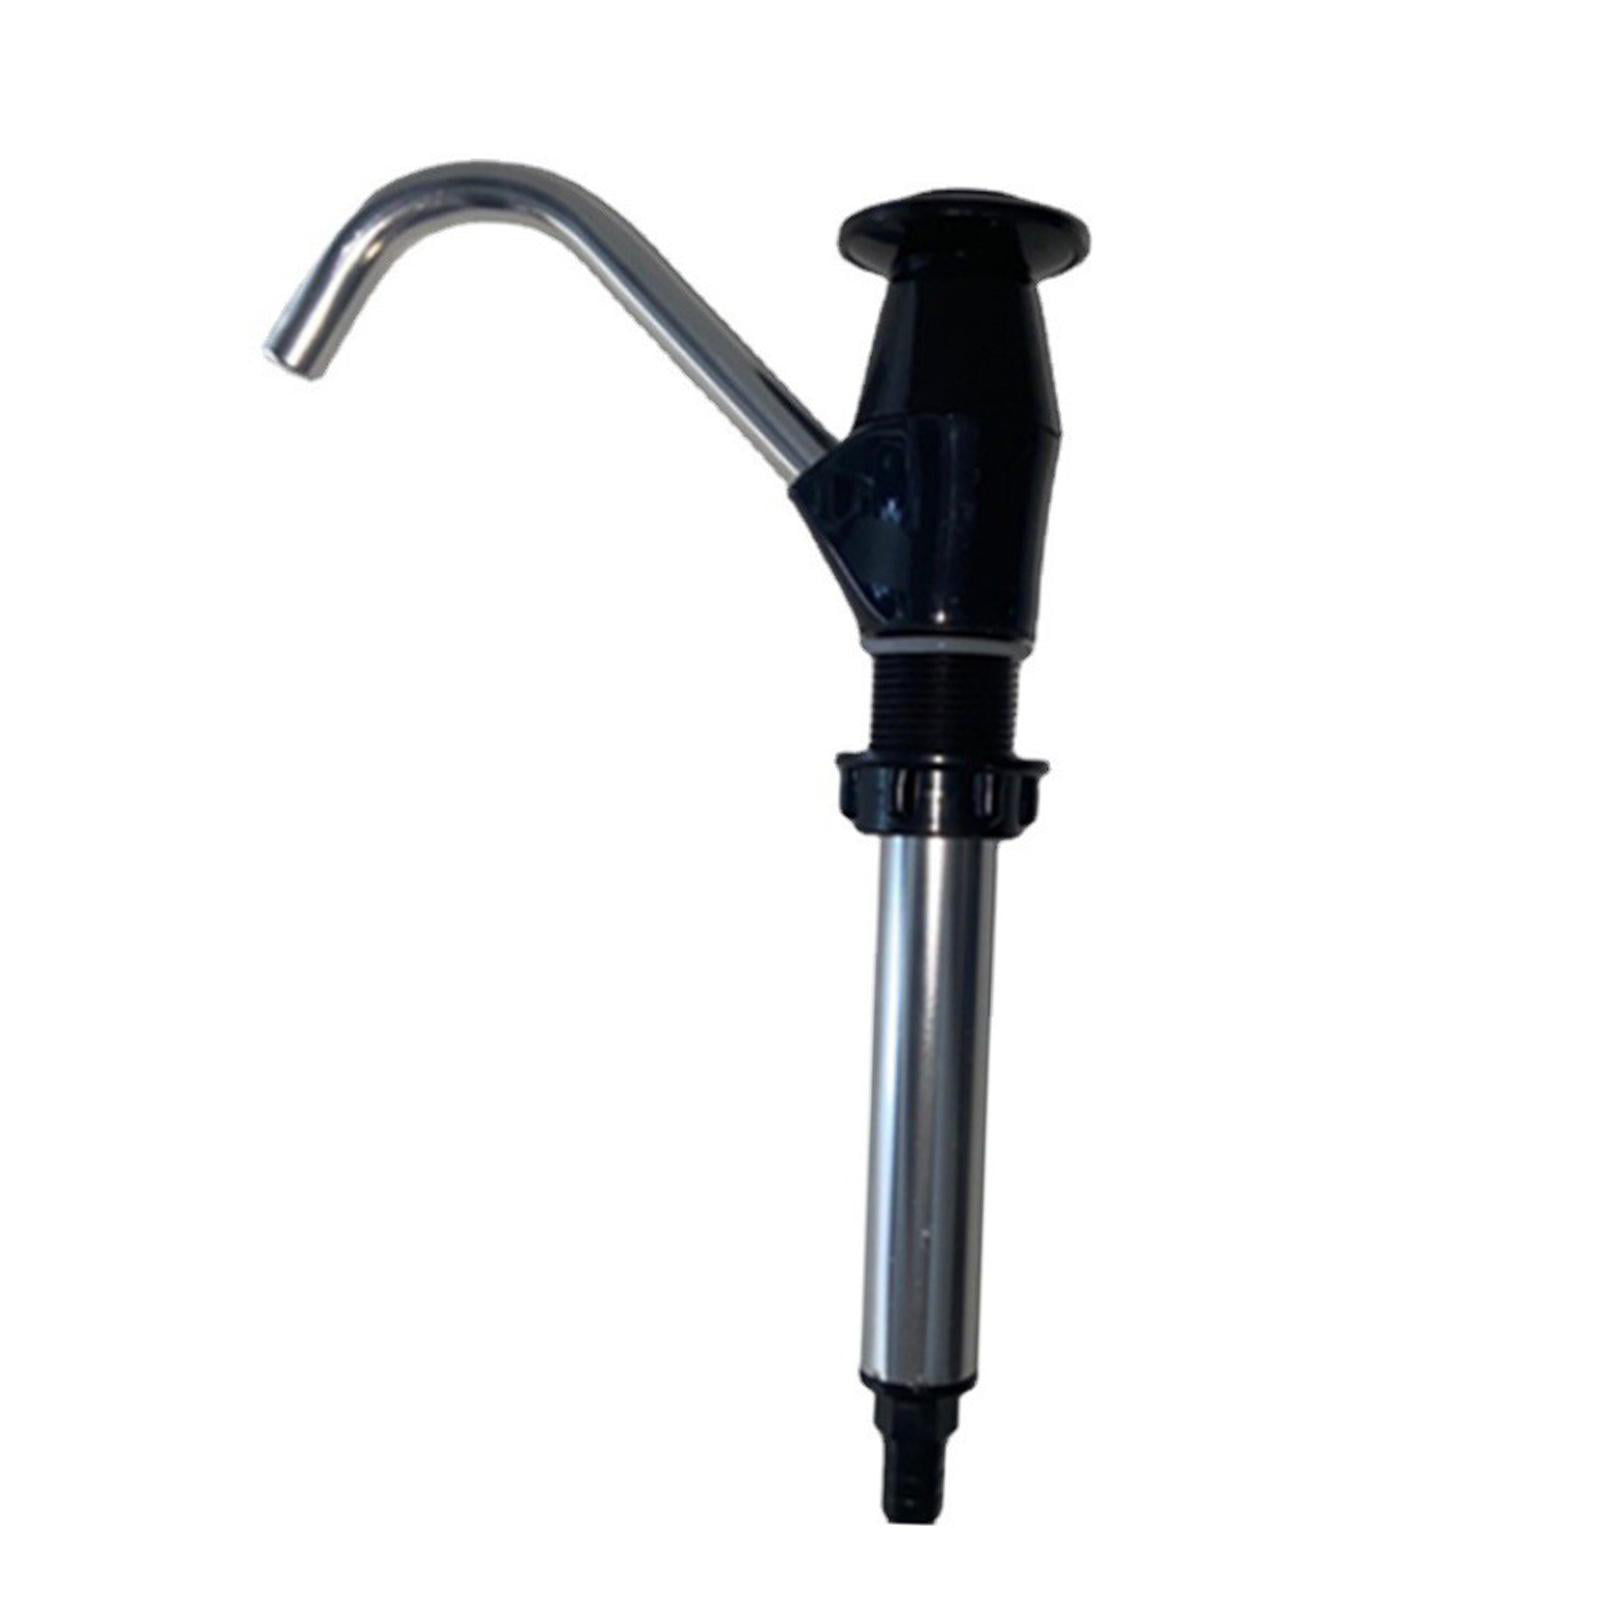 Hand Water Pump Camping Double Action Caravan Sink Hand Pump and Tap for Camping Trailer Motorhome Replacement Pumping Tool Bottle Water Dispenser Pump Swetup Water Hand Pump Tap 